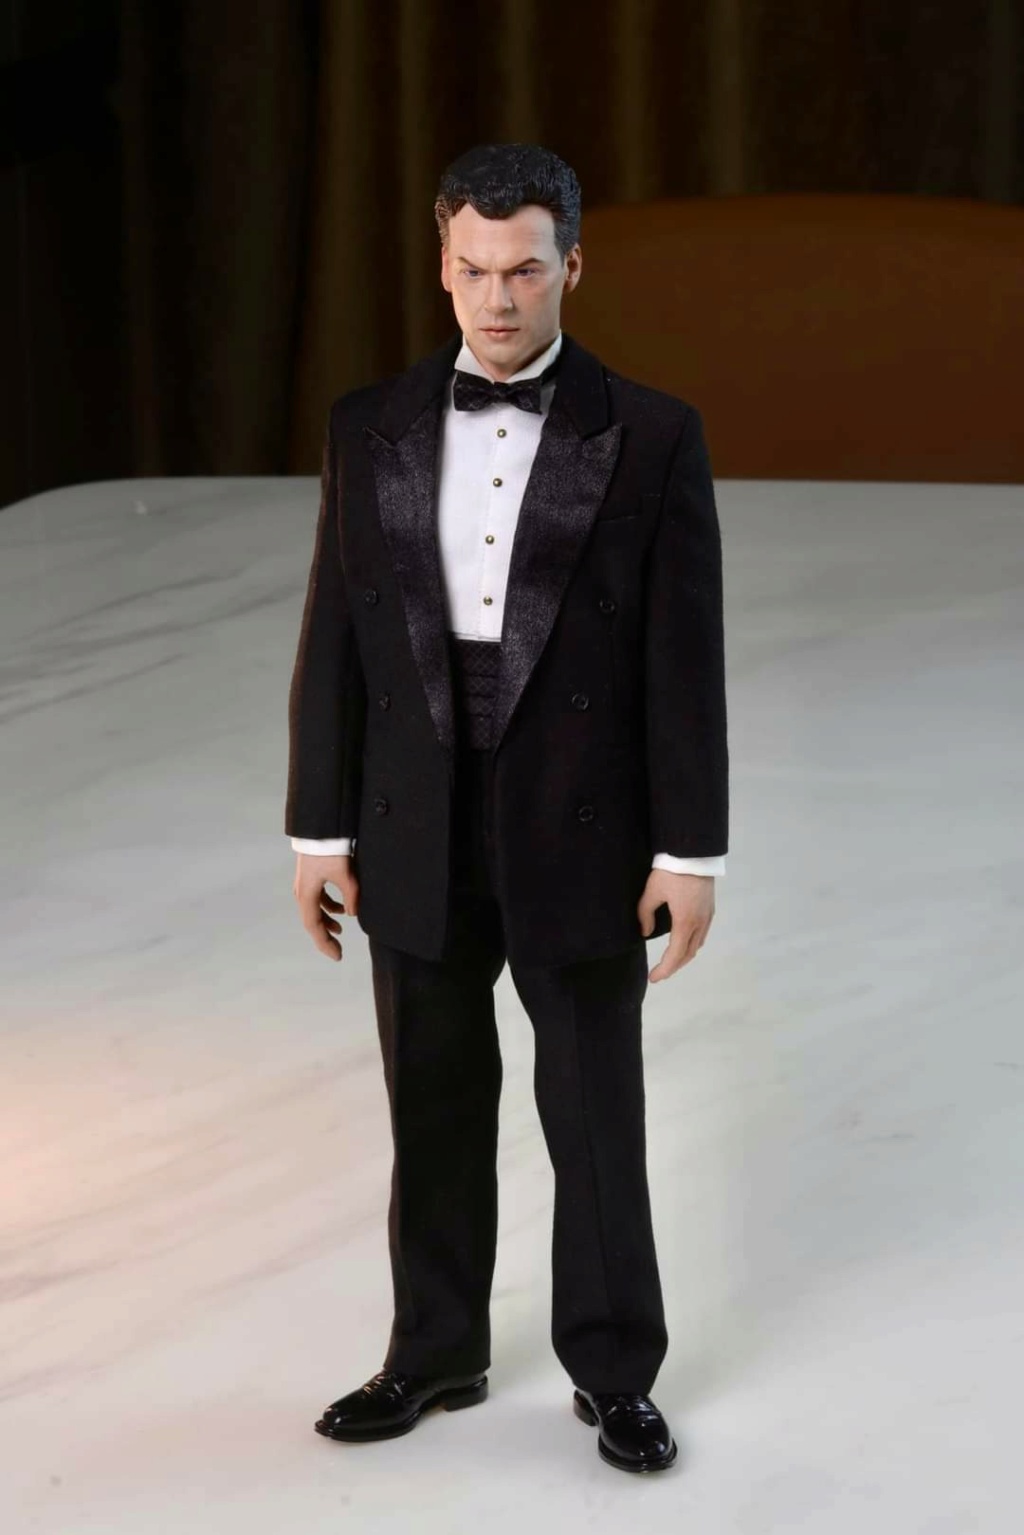 comicbook - NEW PRODUCT: Mars Toys: MAT012 1/6 Scale Mr. W figure Img_6116